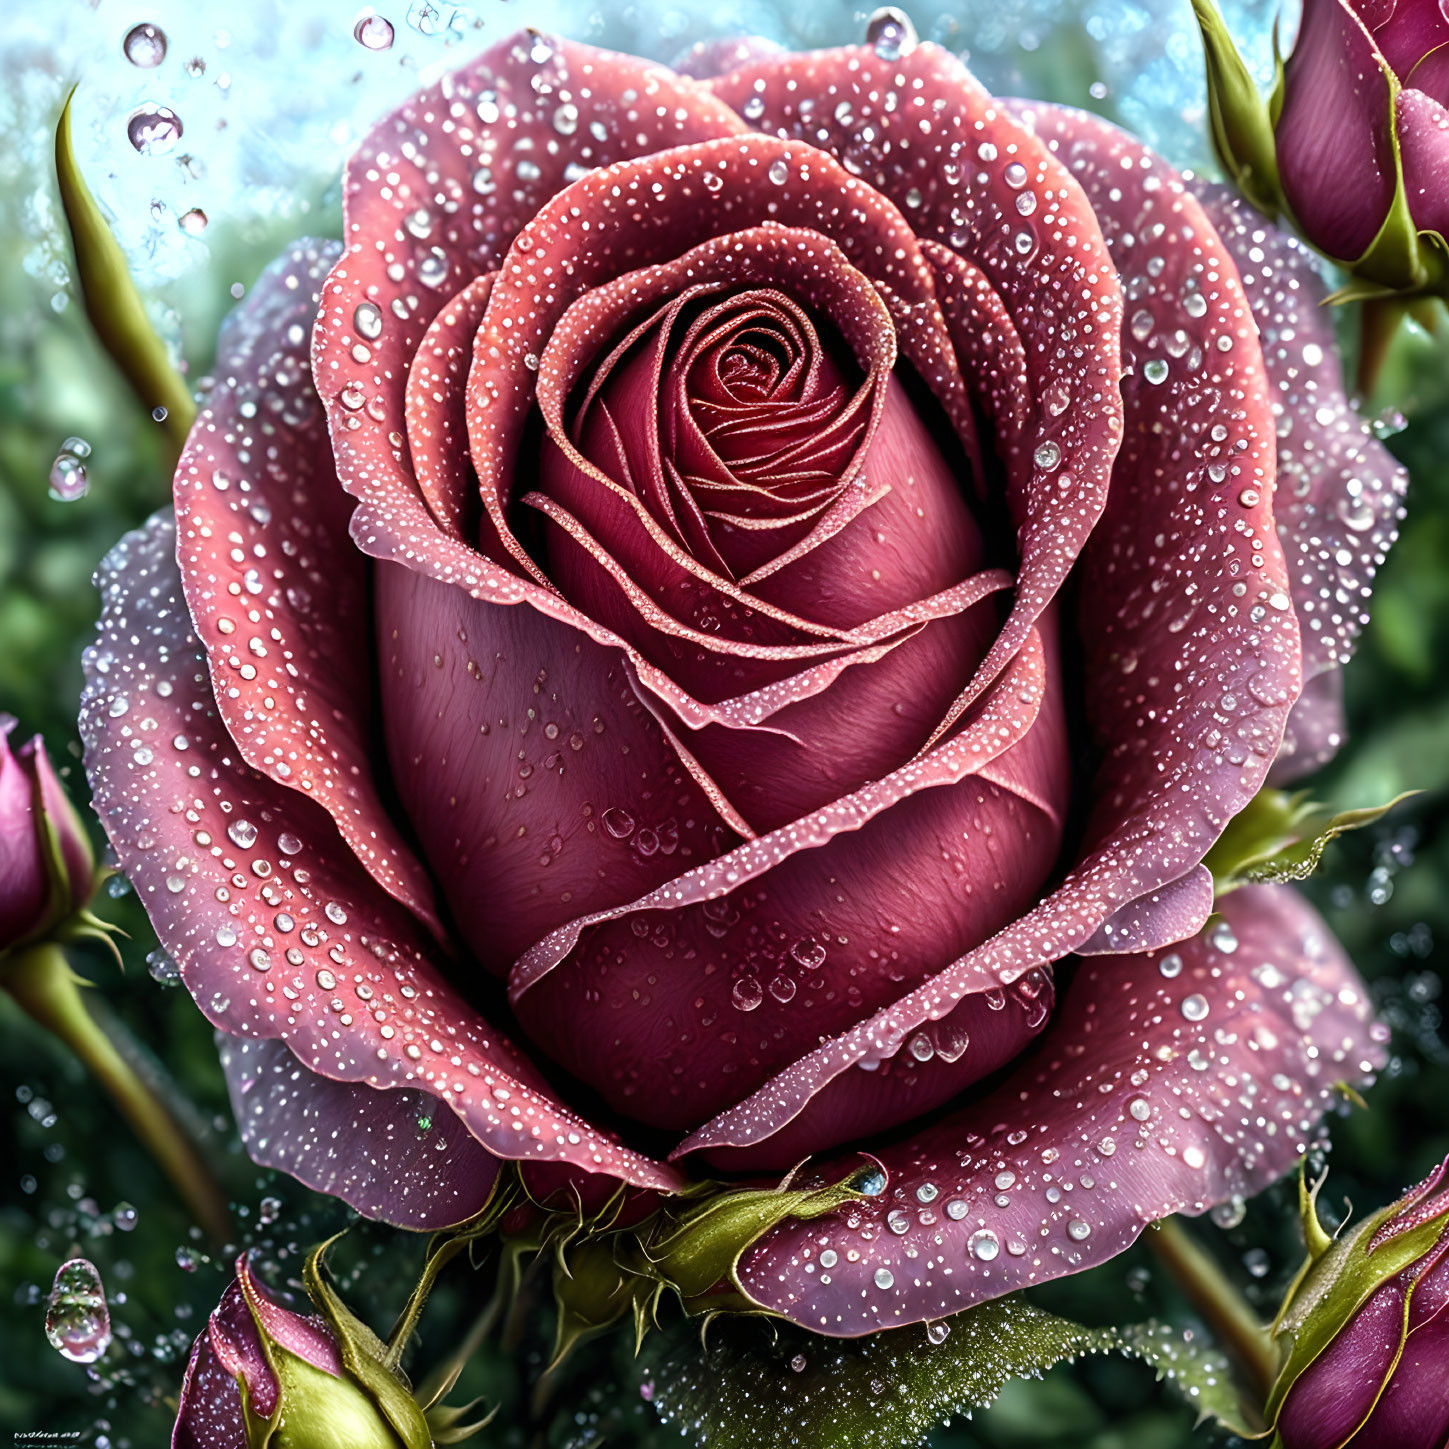 Close-up of dew-covered rose with soft pink petals and budding flowers.